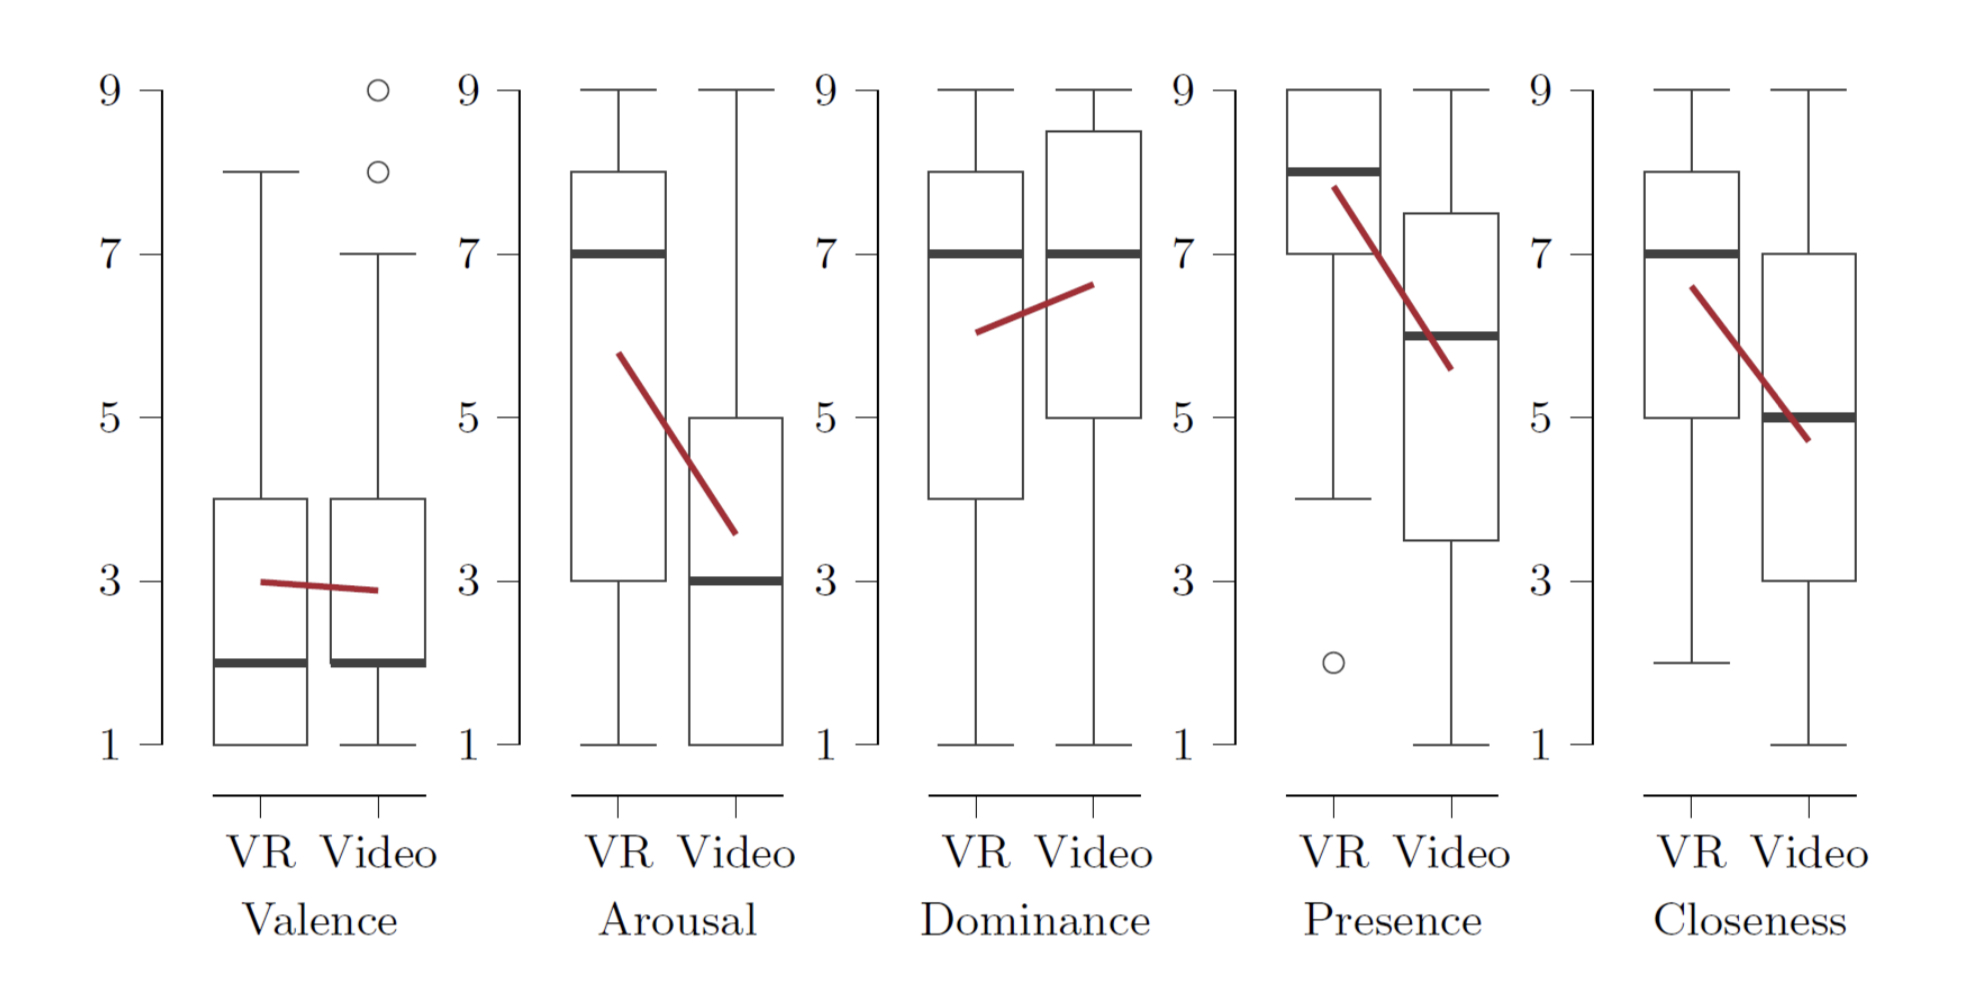 These box plots illustrate a comparison of Valence, Arousal, Dominance, Pres- ence and Closeness reported by the participants